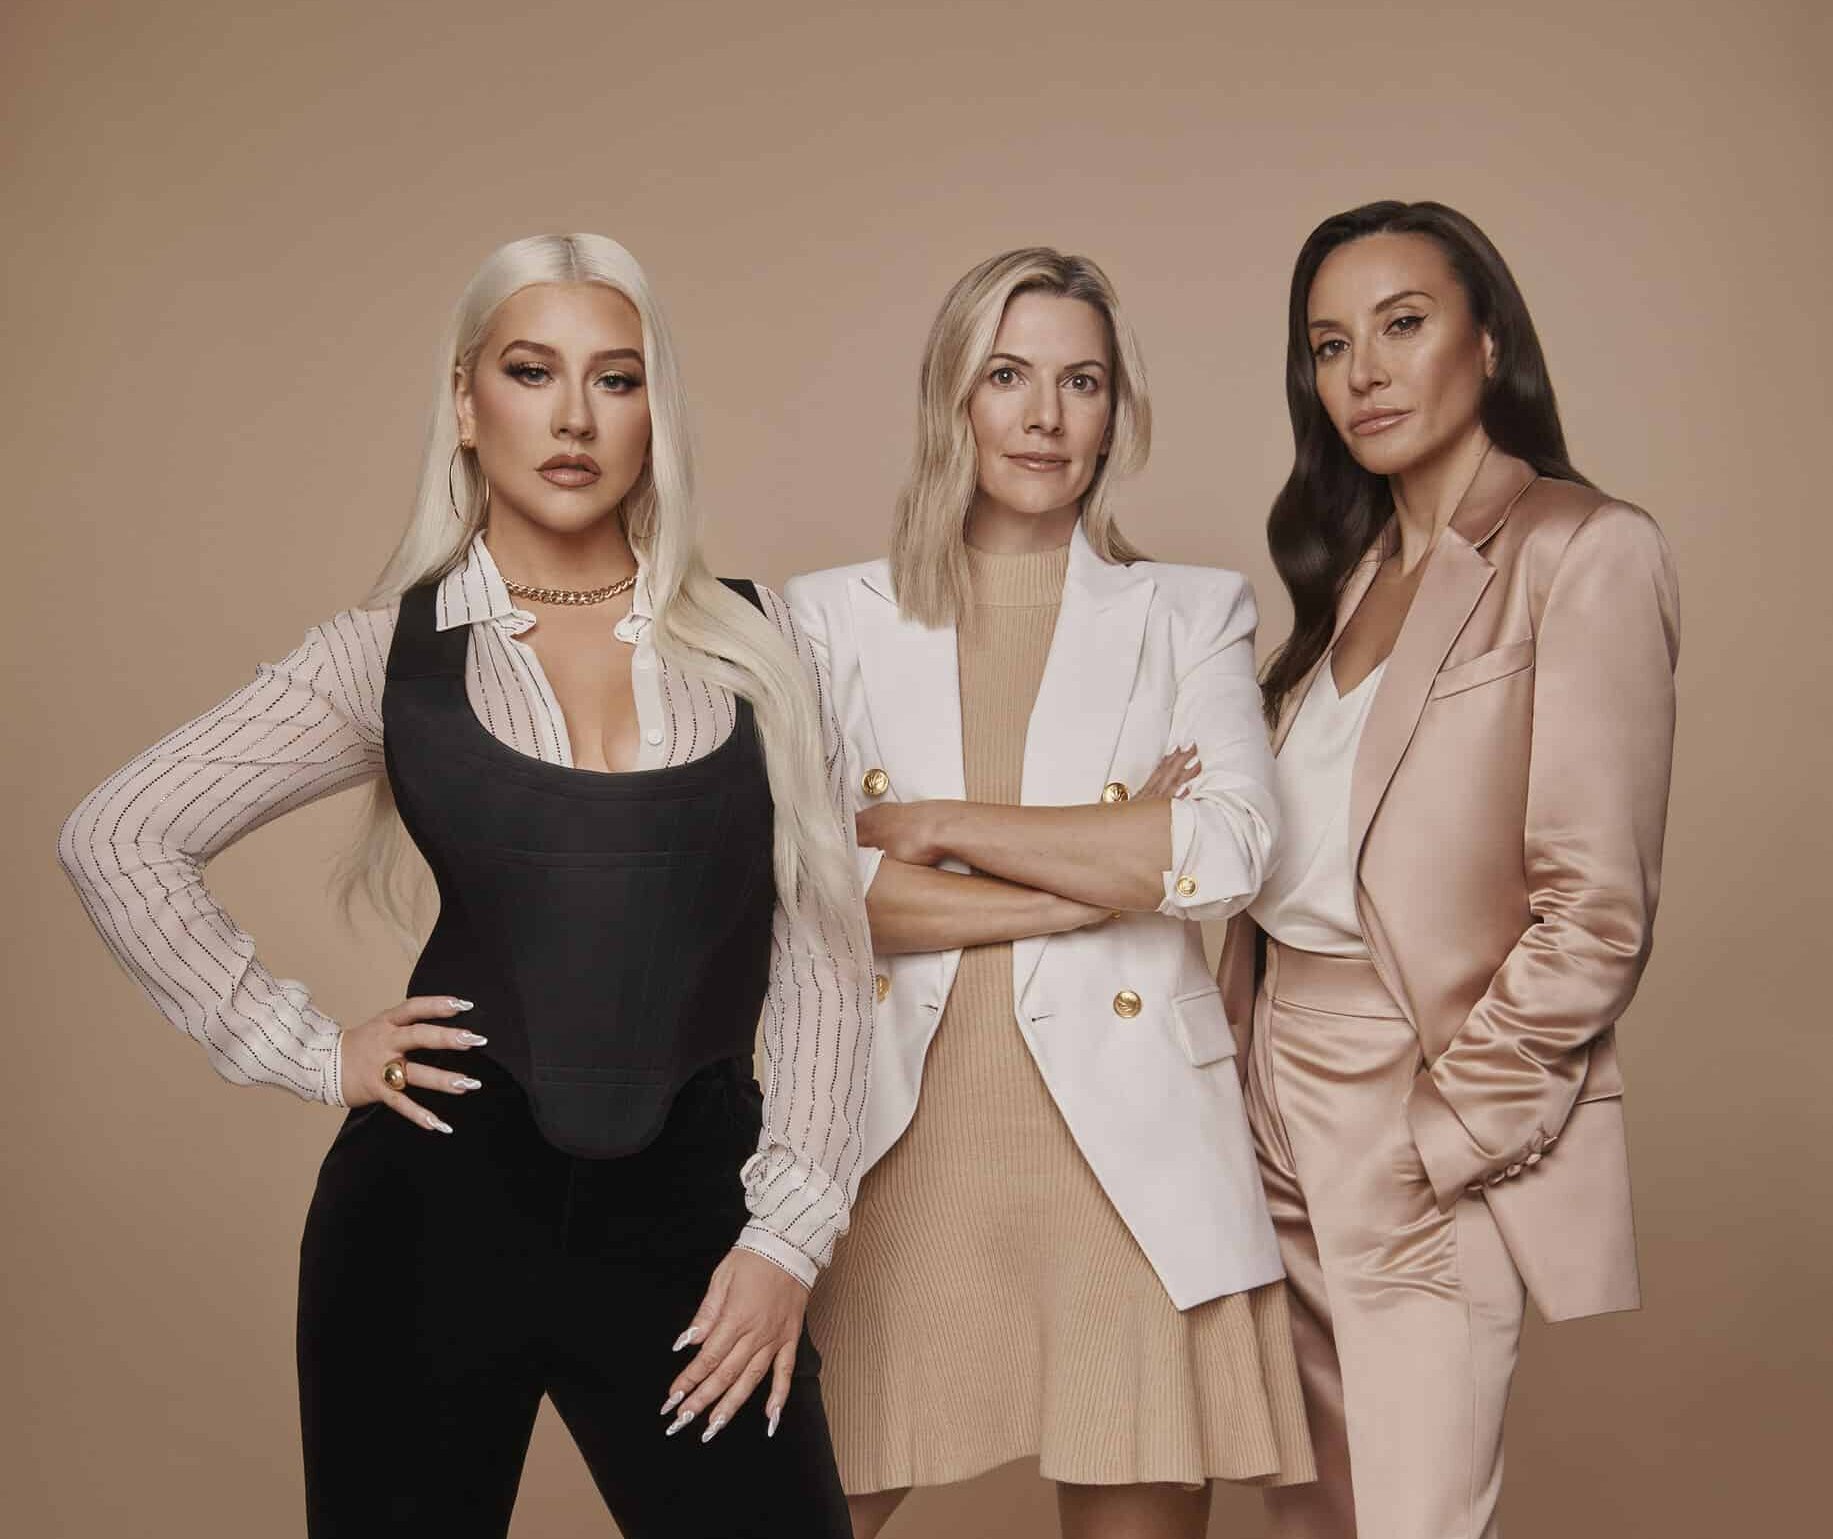 Playground Co-Founder and Chief Brand Advisor Christina Aguilera, Co-Founder and Chief Executive Officer Catherine Magee, and Co-Founder and Chief Product Officer Sandy Vukovic